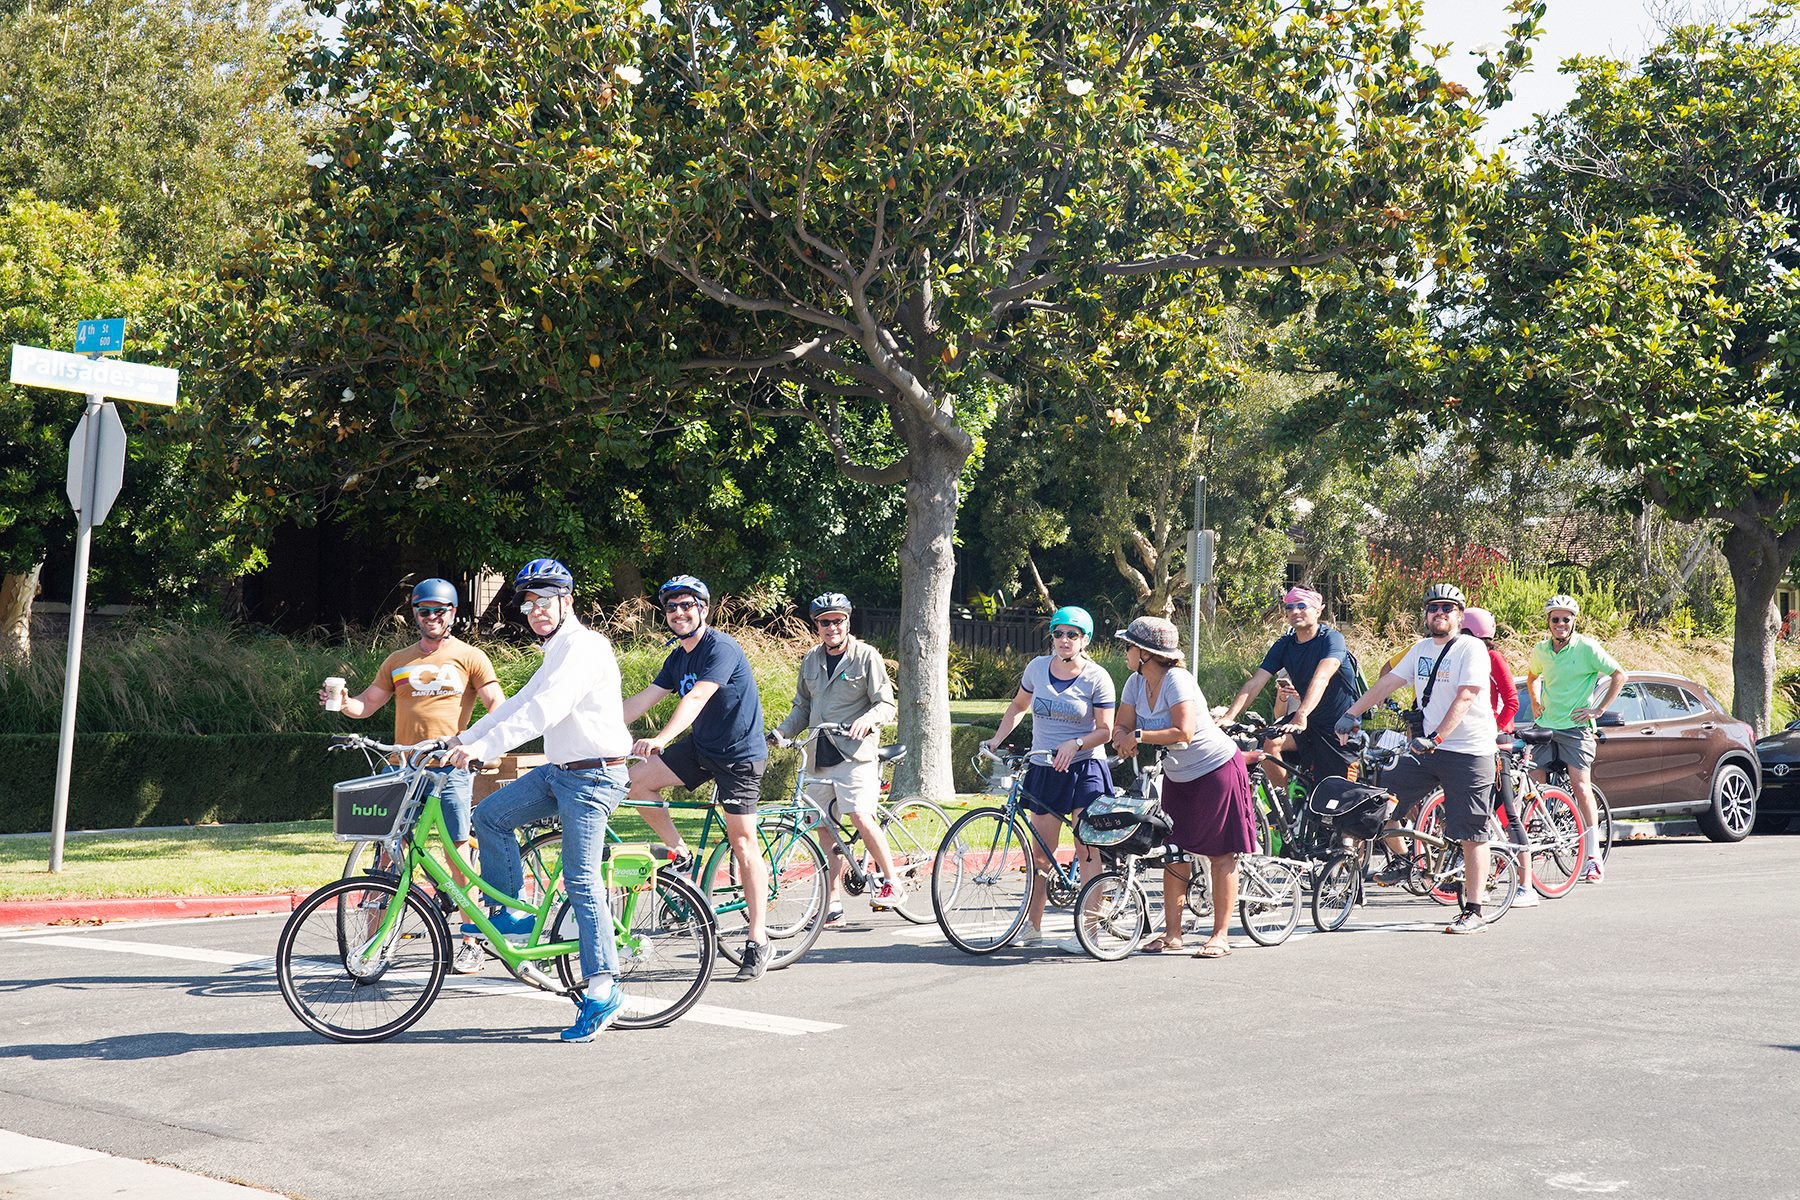 City Manager Rick Cole and a group exploring Santa Monica during one of Ted's rides.